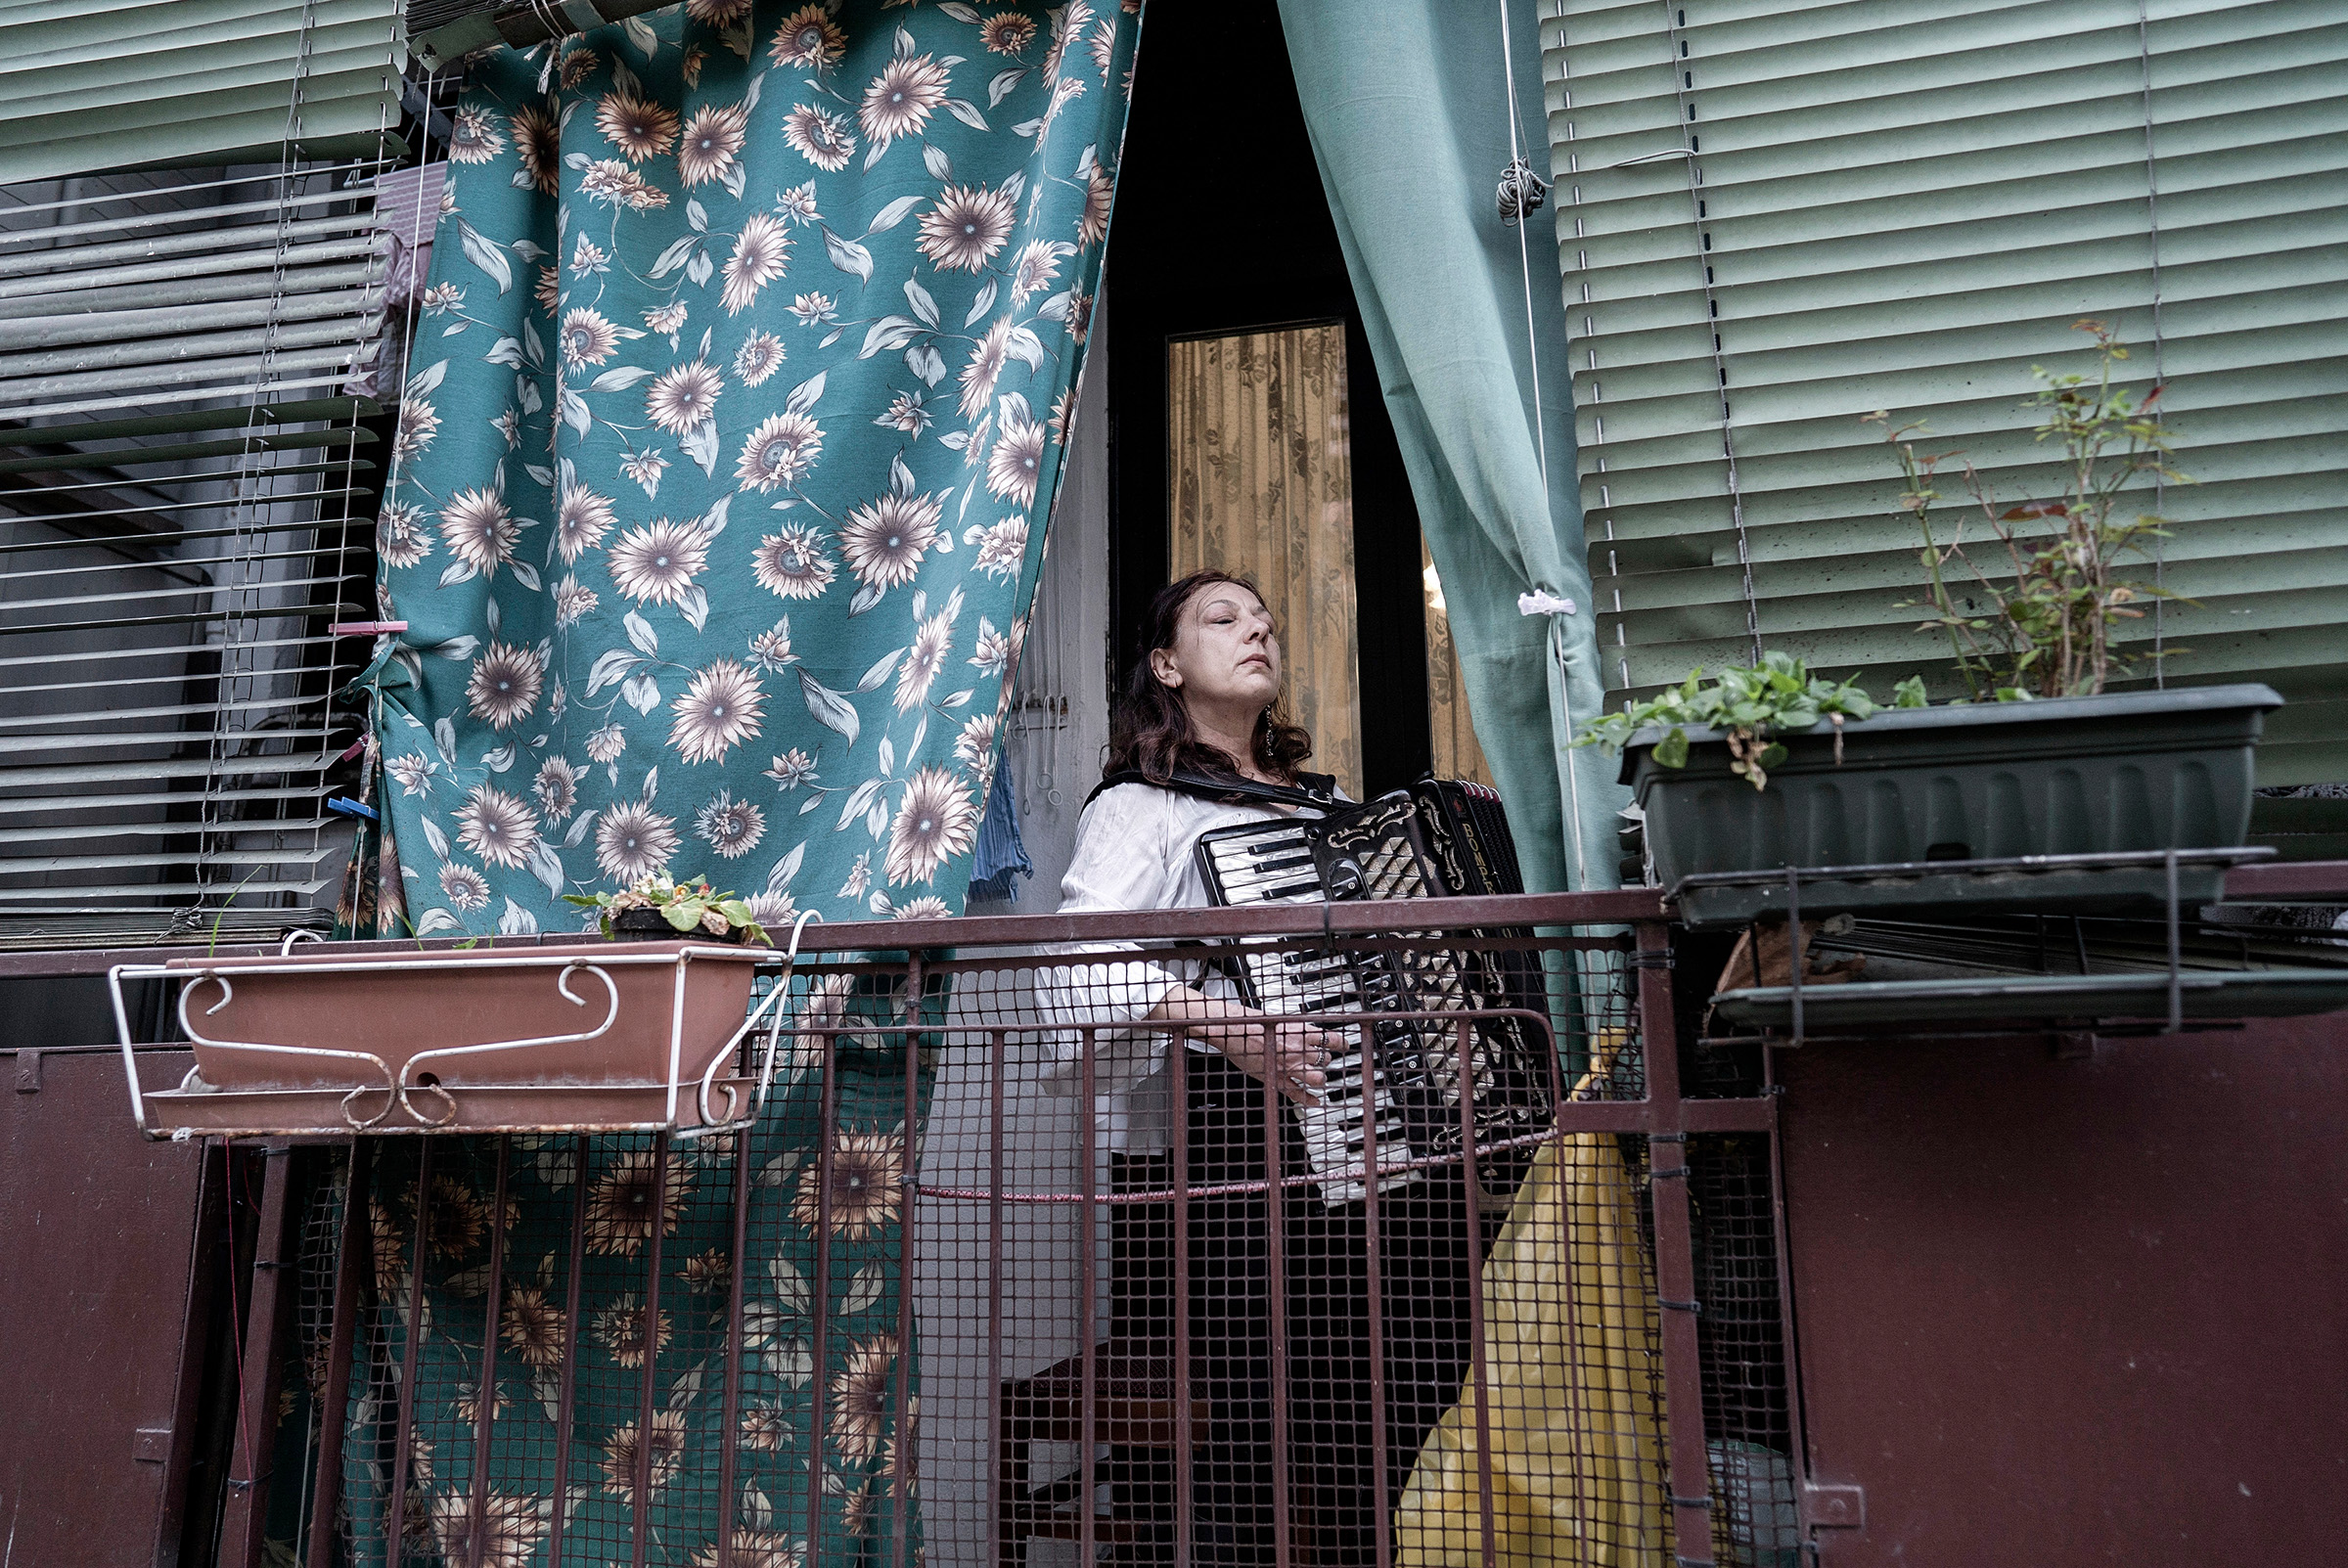 Citizens of Milan take to their balconies on March 13 to serenade their neighbors; 10 days later, Italy had nearly 70,000 confirmed cases of COVID-19 and almost 7,000 dead (Alessandro Grassani—The New York Times/Redux)